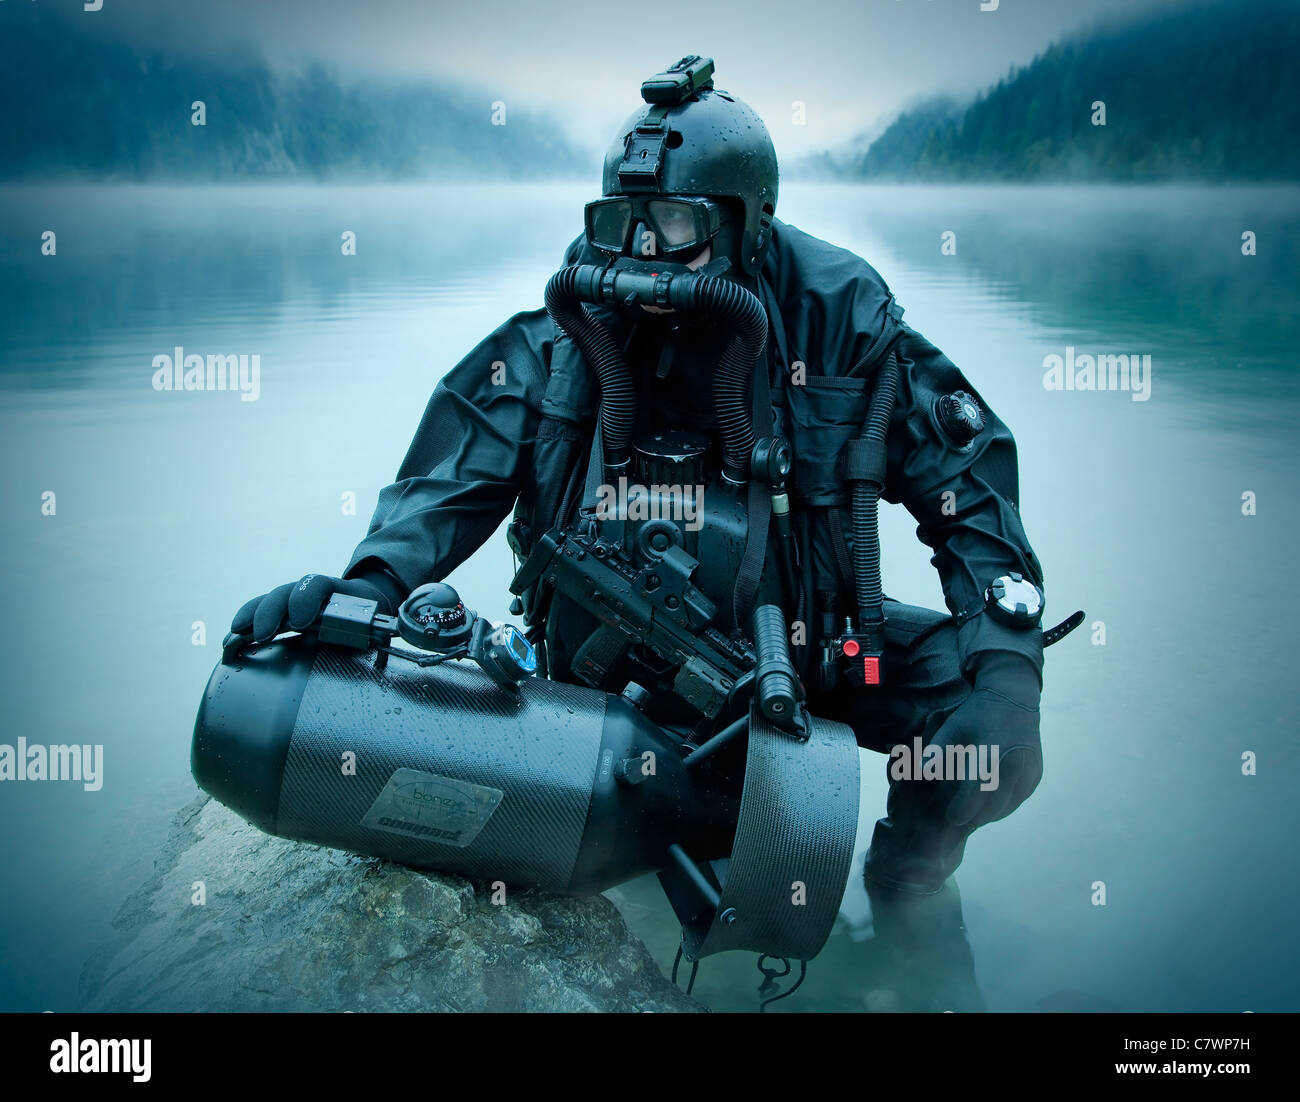 Special operations forces combat diver with underwater propulsion vehicle. Stock Photo